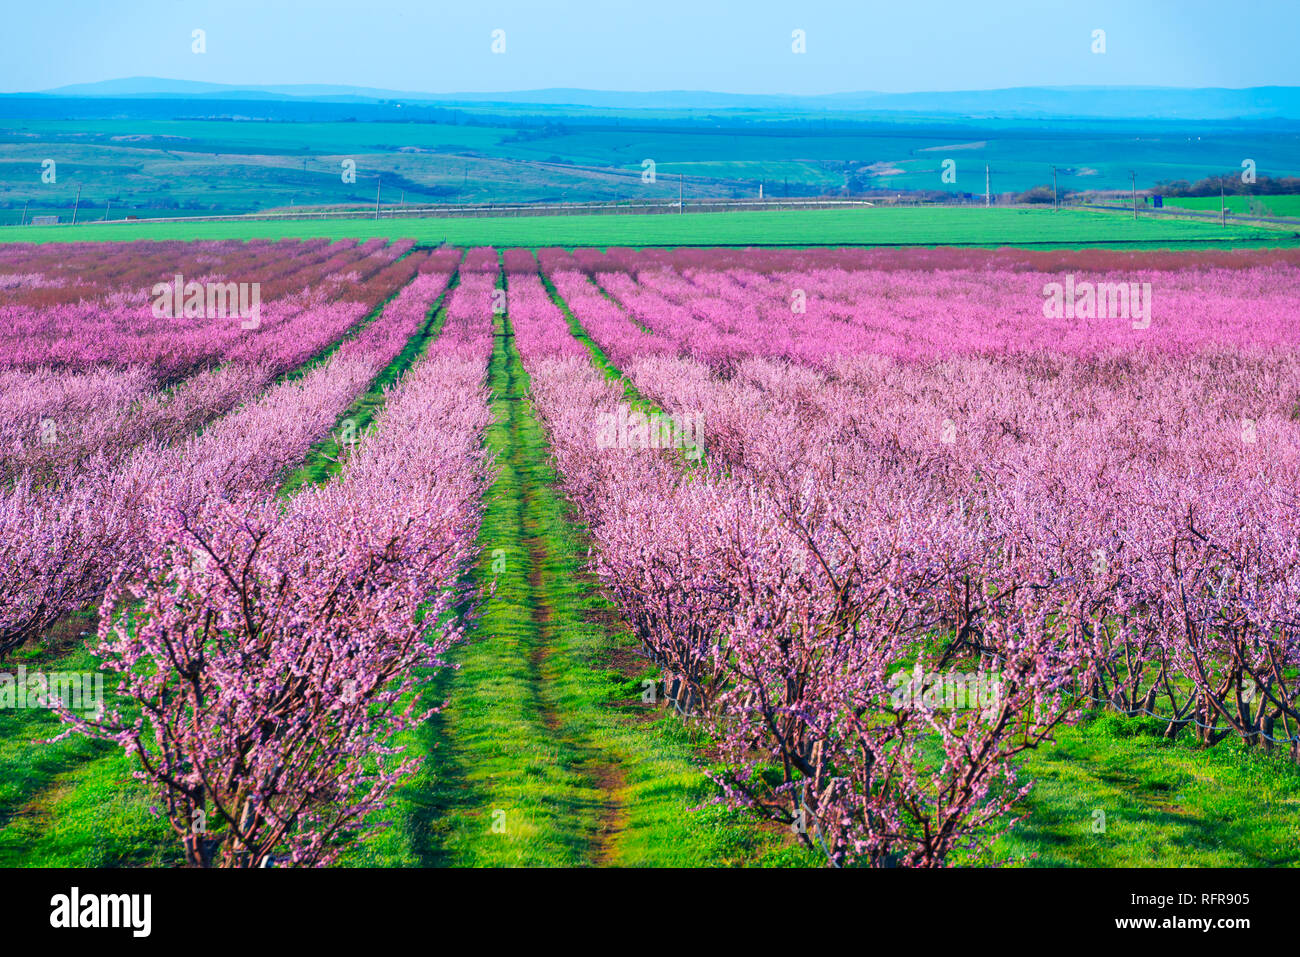 Rows of blossom peach trees in spring garden. Landscape photography Stock Photo